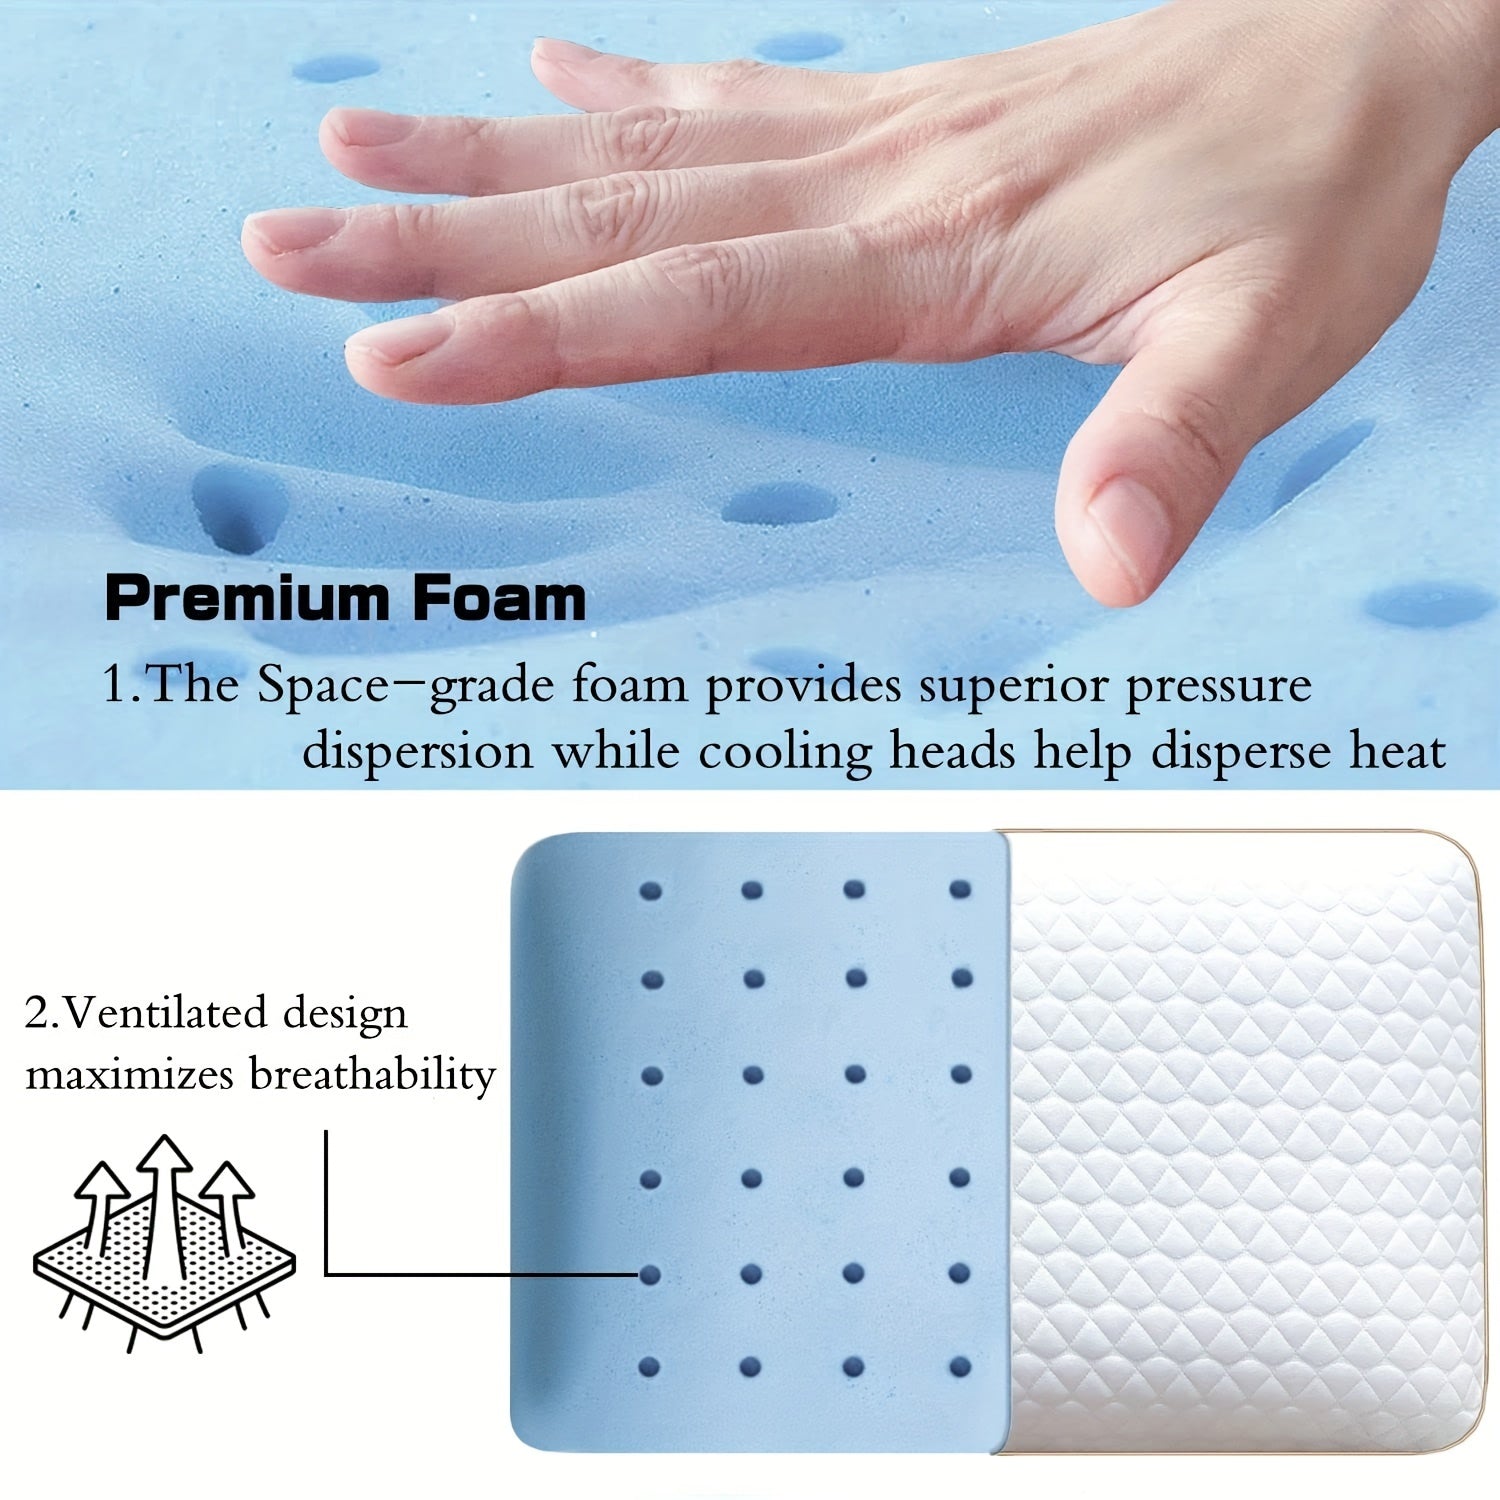 1 pcs/2 pcs Gel Memory Foam Pillow Standard/Queen Size Medium Firm Pillow for Sleeping, Orthopedic Bed Pillows for Stomach Back or Side Sleepers, Ventilated Design Cooling Gel with Washable Cover Bee's to Find